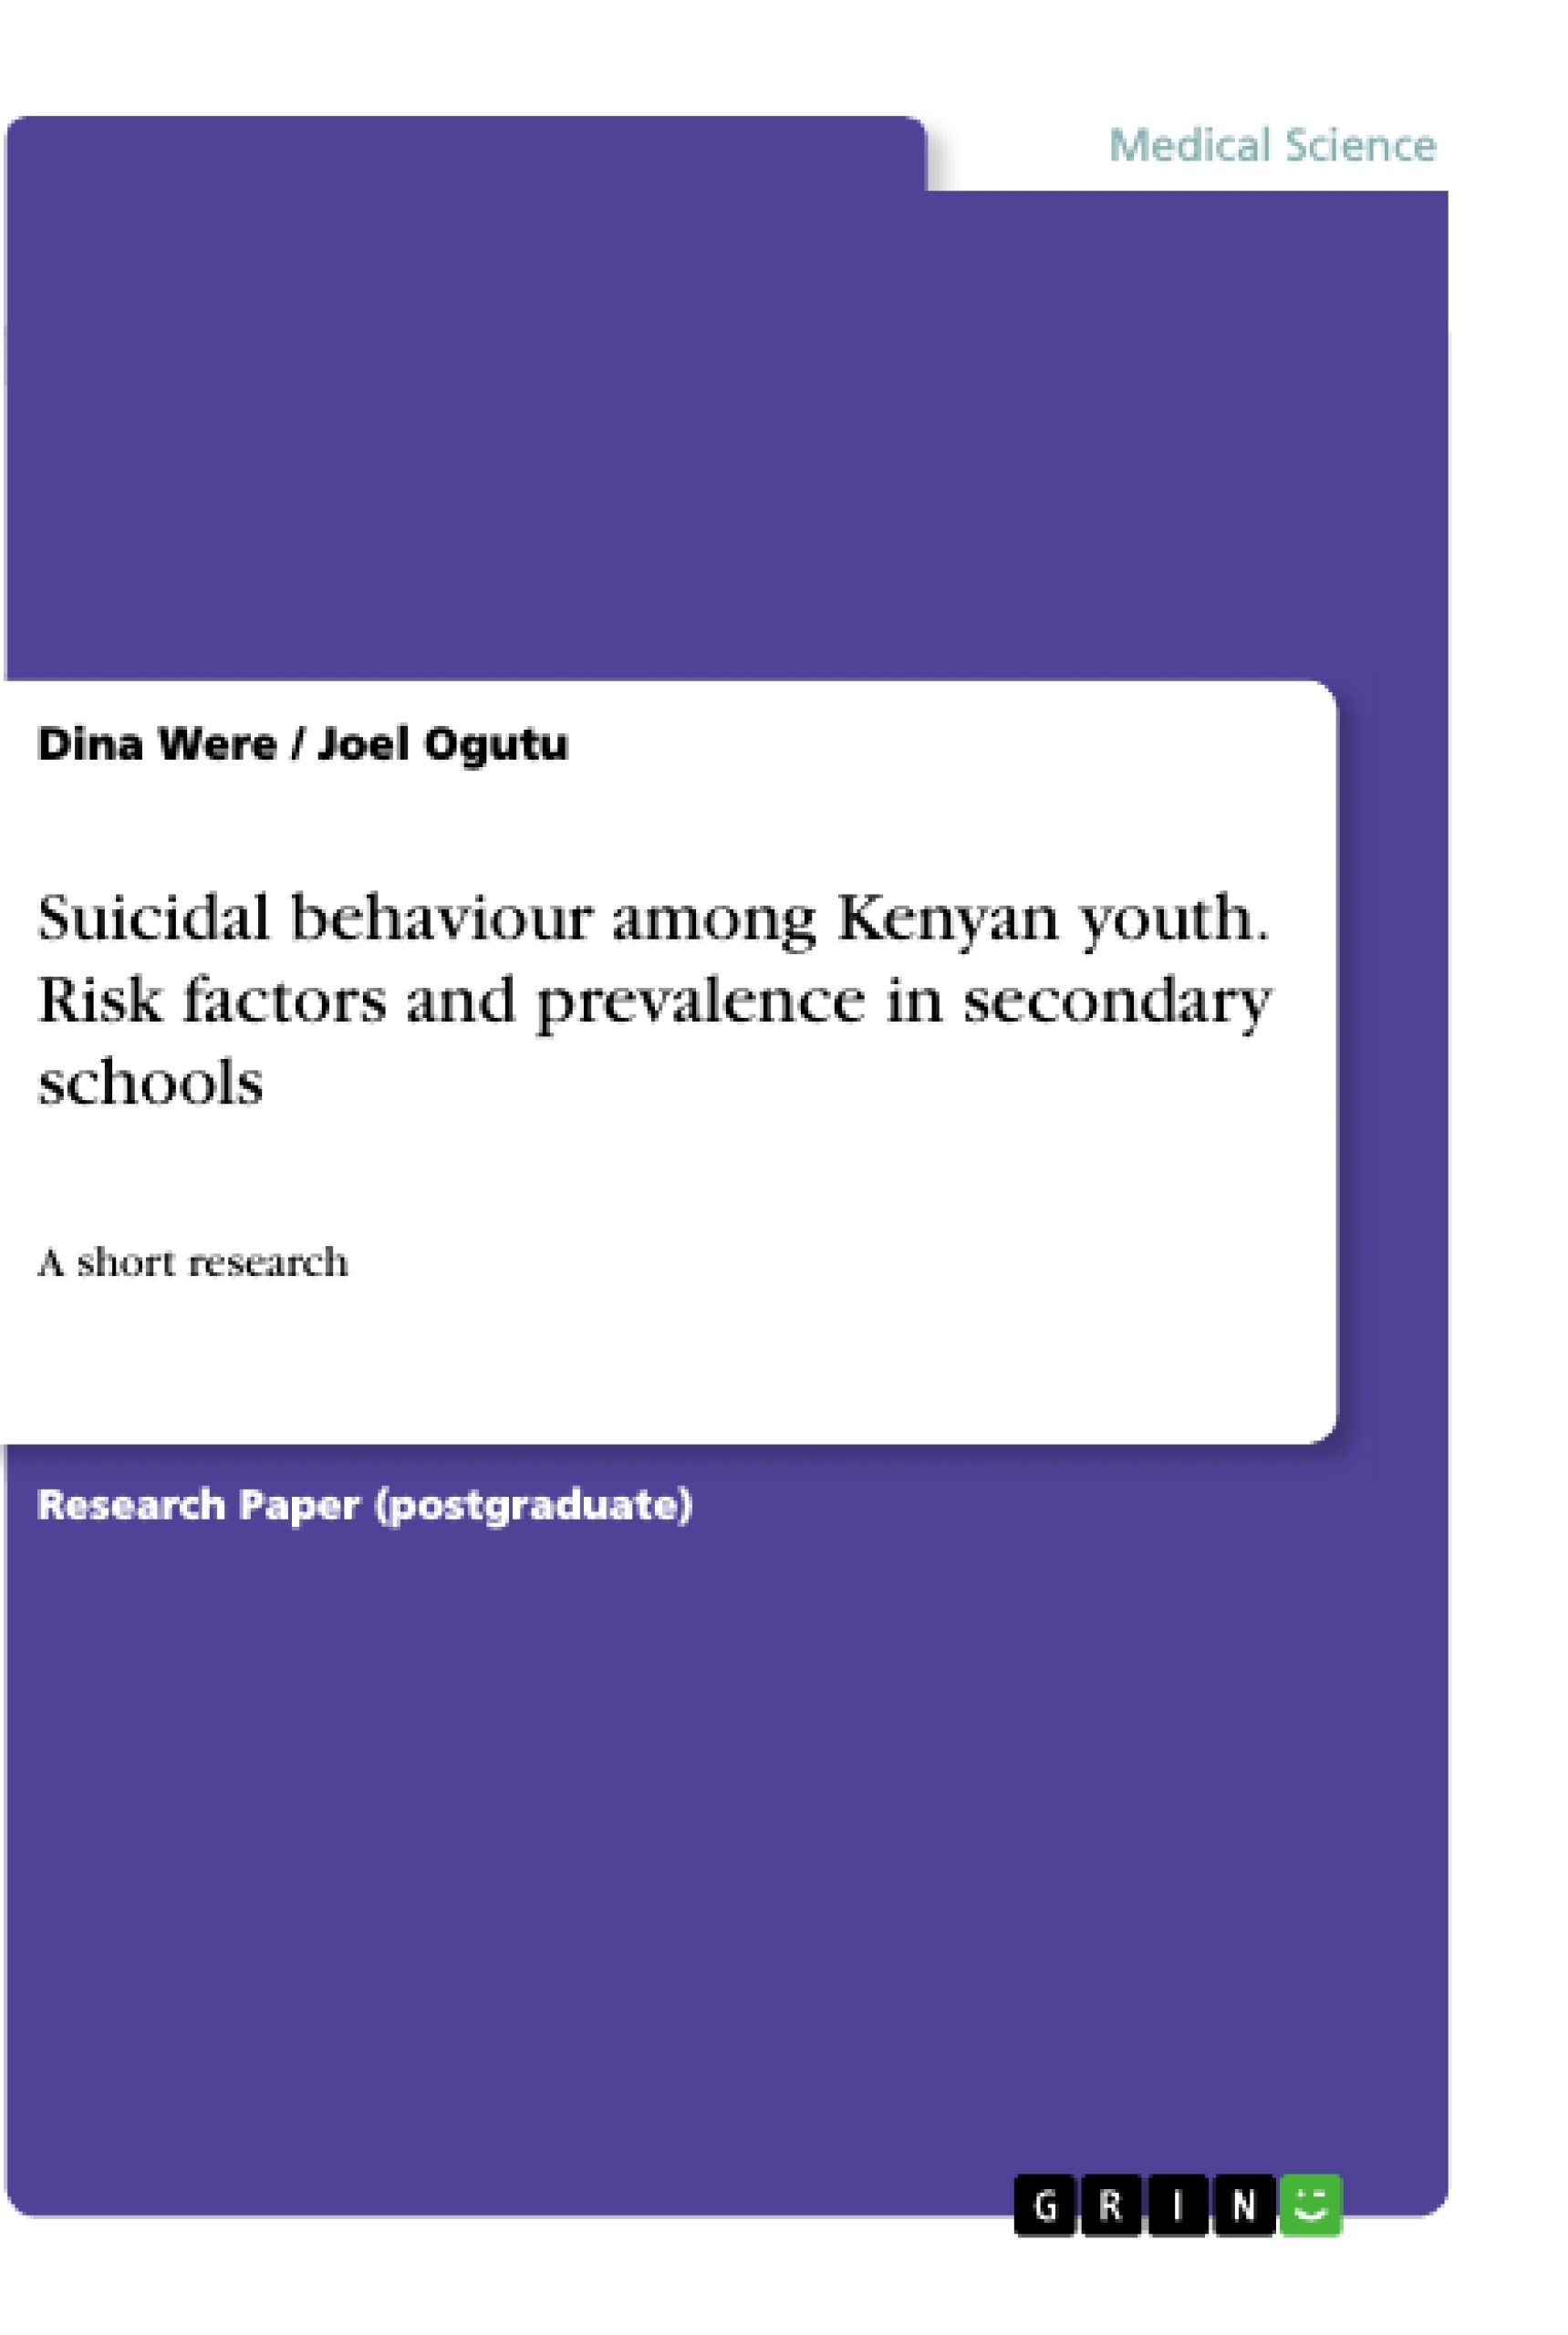 Title: Suicidal behaviour among Kenyan youth. Risk factors and prevalence in secondary schools